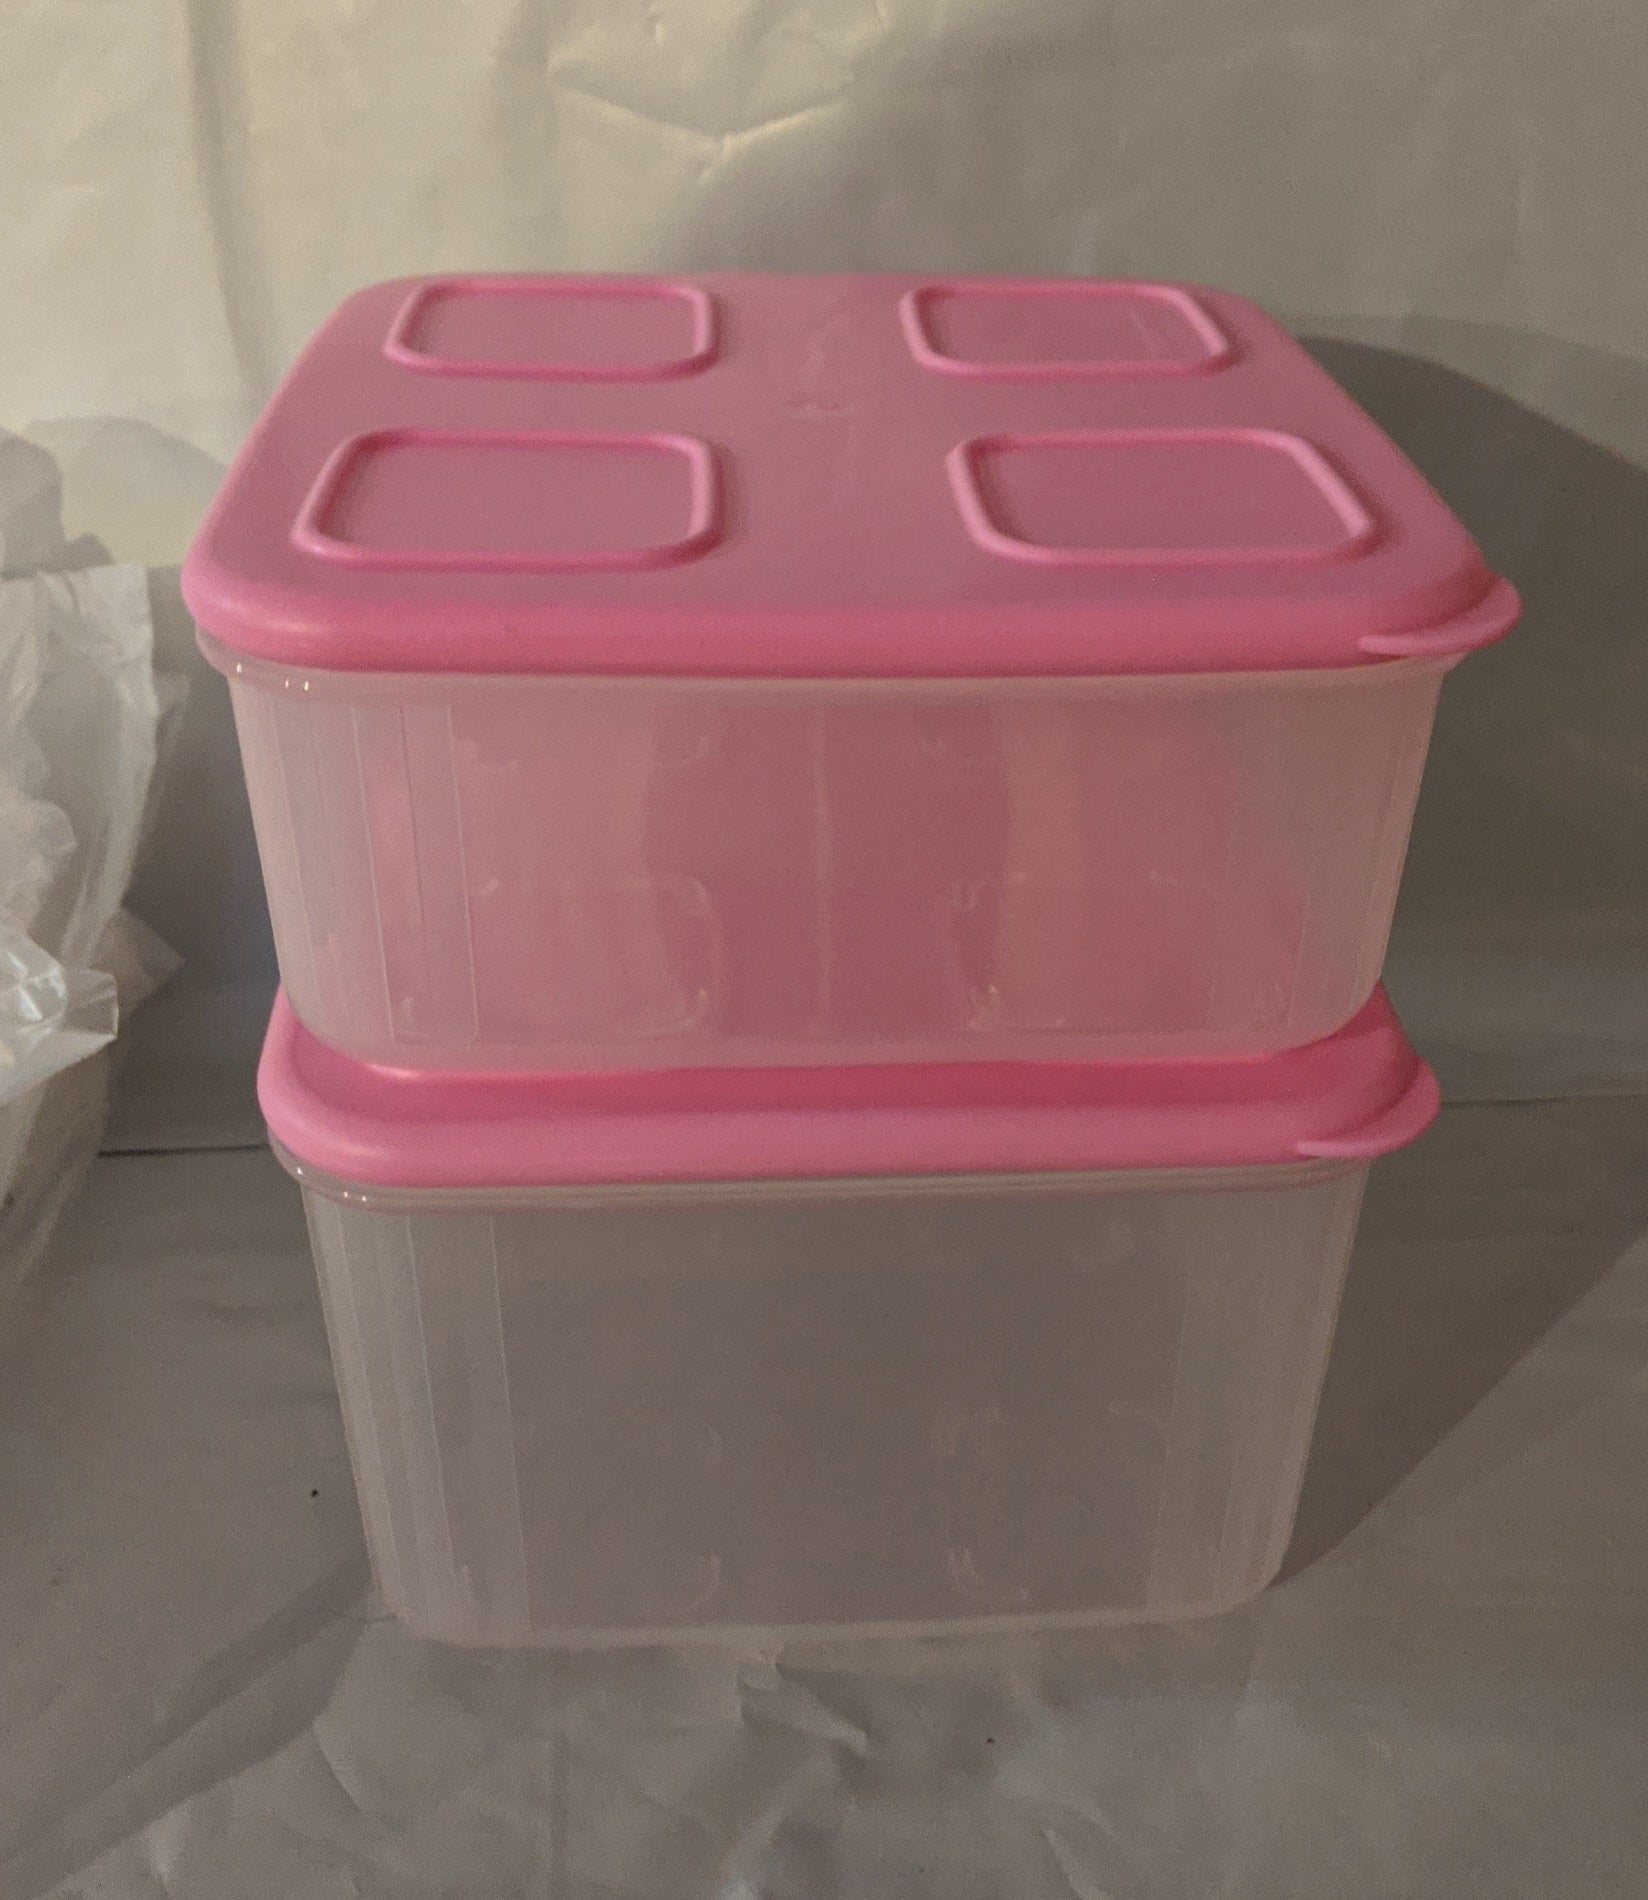 Tupperware Keep Tabs Nesting Stacking Square Storage Containers Set 2 Pink  2 c